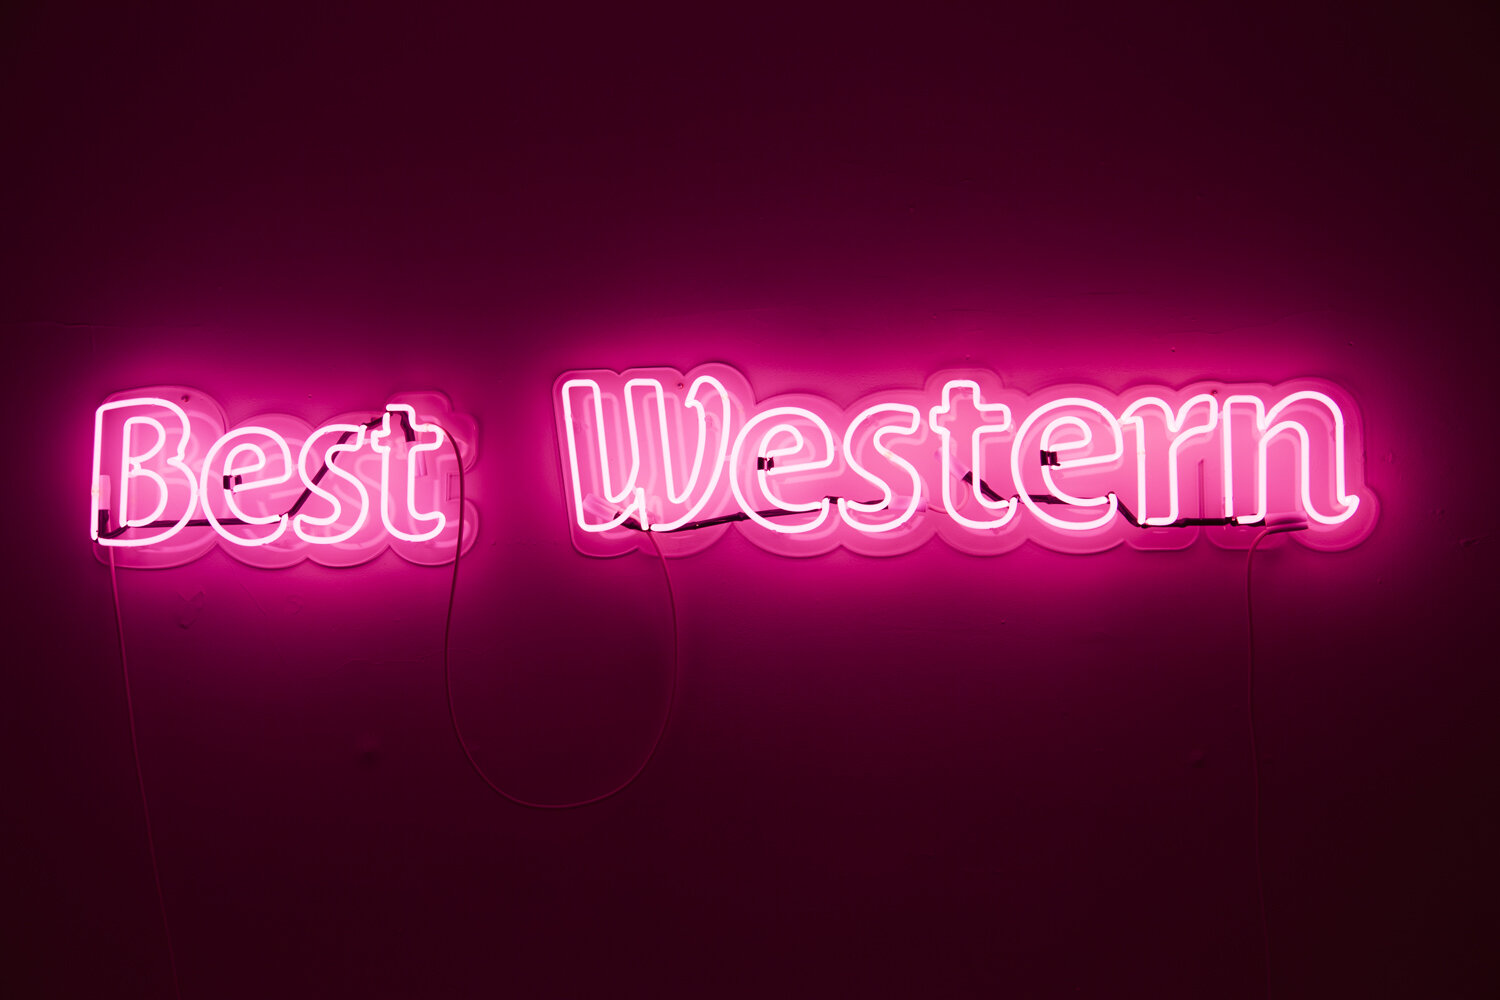   Best Western , 2019. 72 x 10 x 2 inches. 